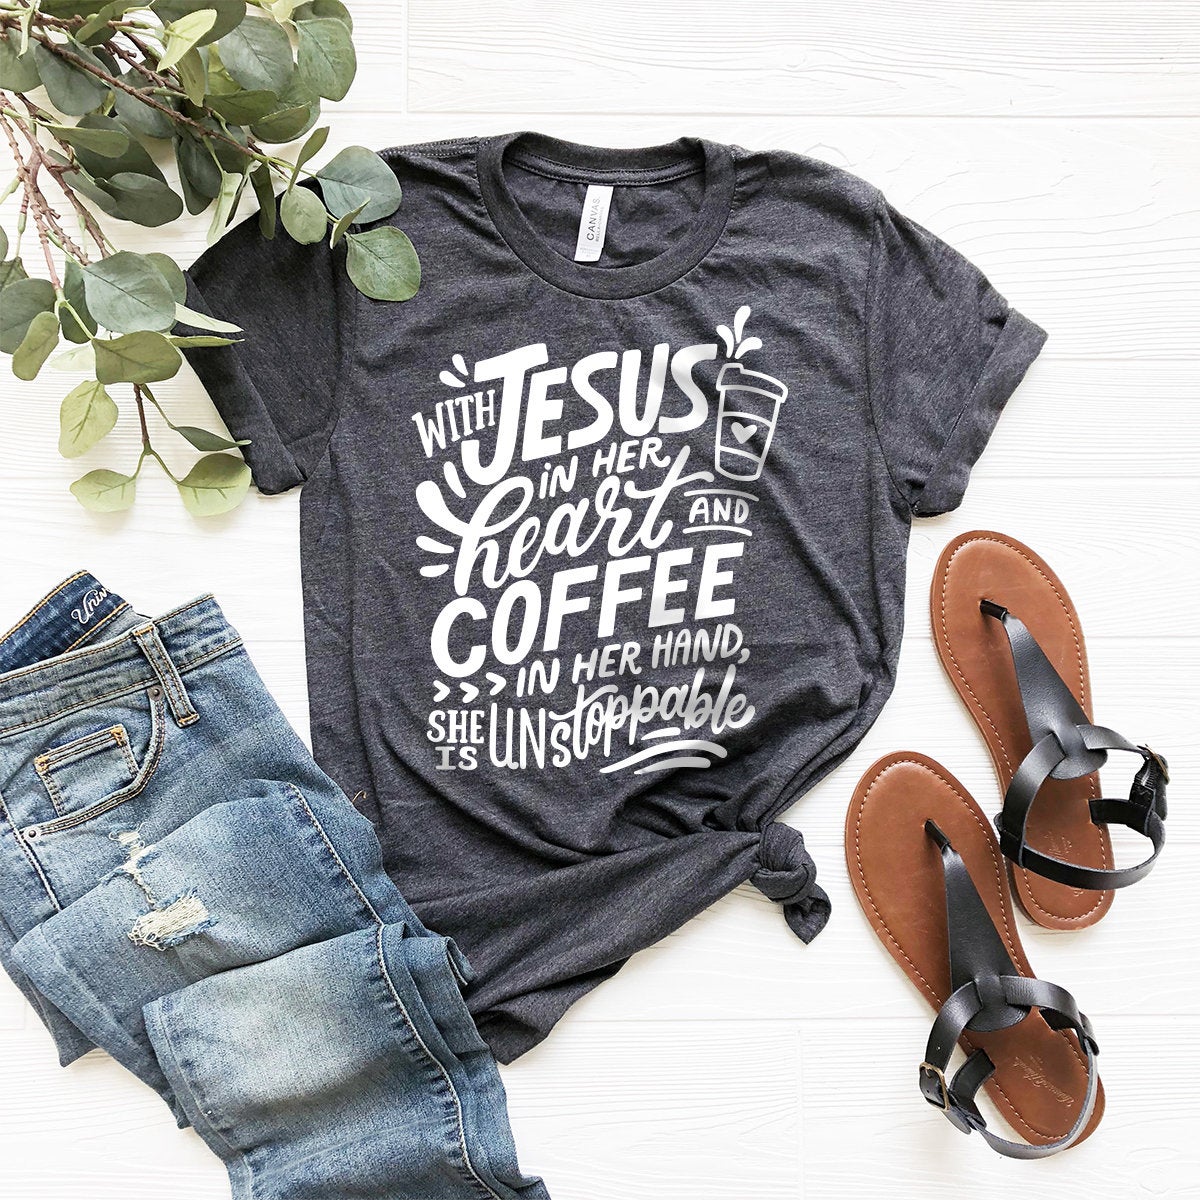 Jesus And Cofee Shirt, Coffee Shirt, Jesus Shirt, Jesus Lover T-Shirt, Coffee Lover Shirt, With Jesus In Her Heart And Coffee In Her Hand - Fastdeliverytees.com